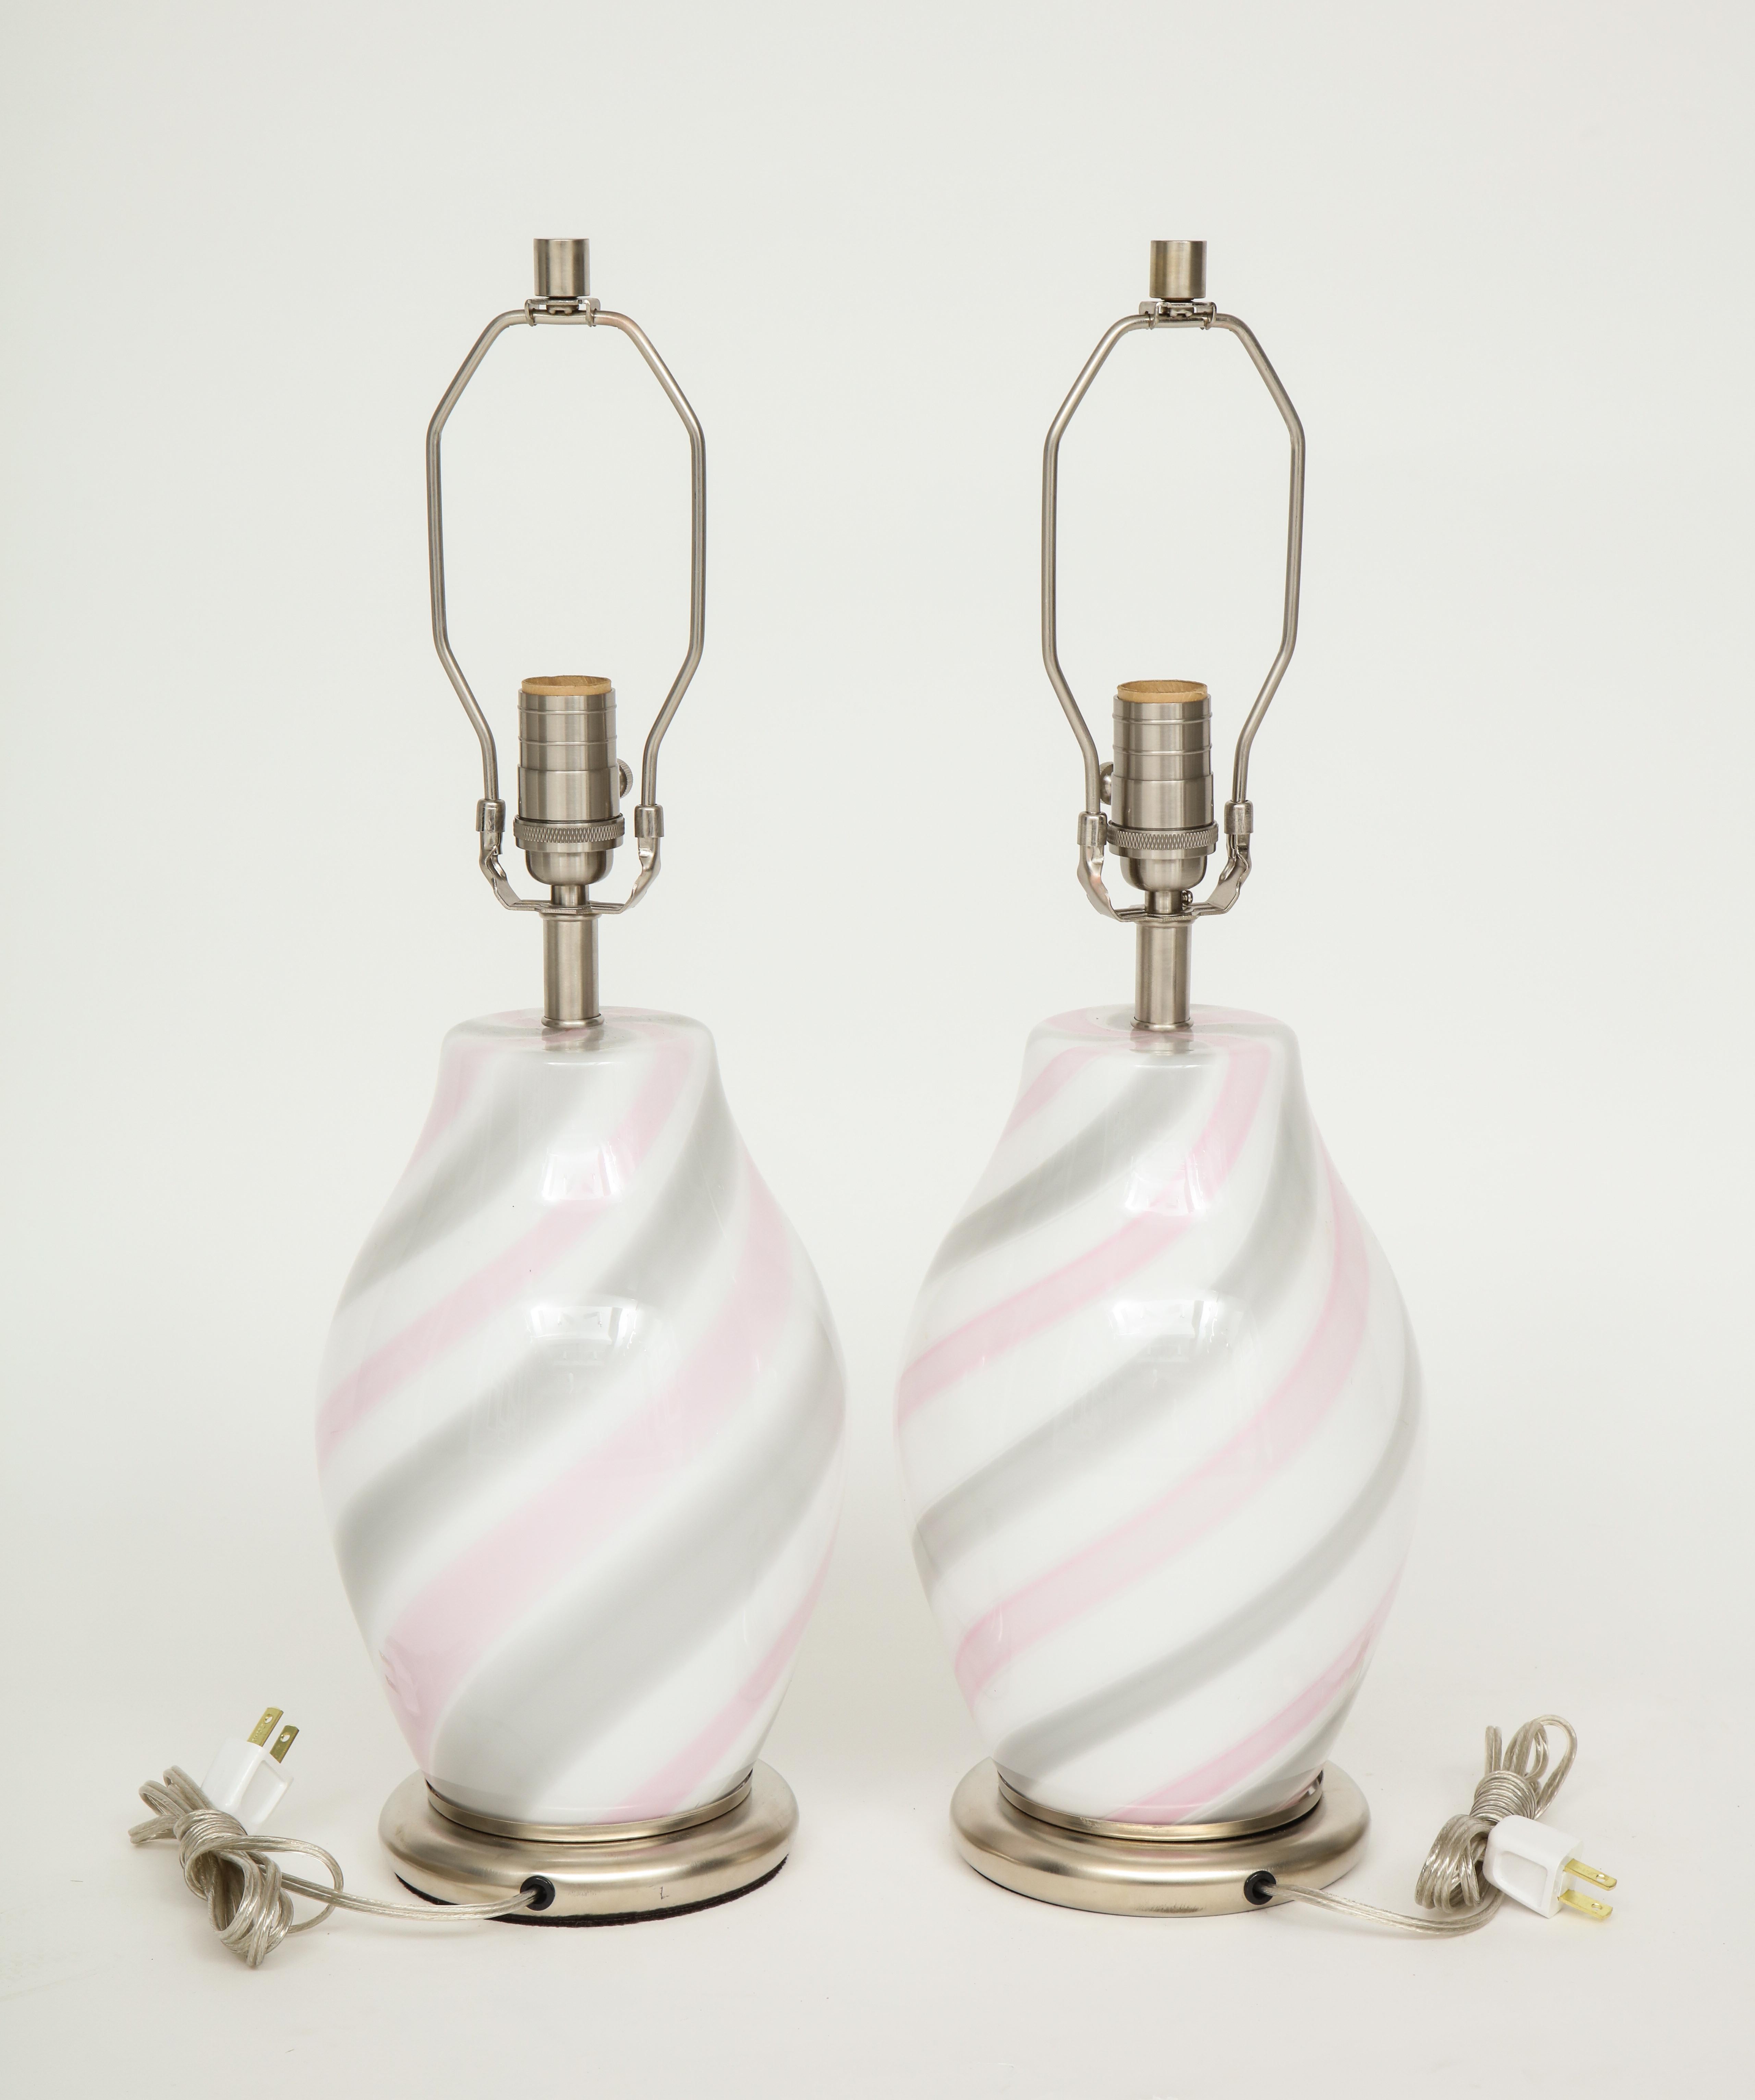 Pair of Midcentury Murano glass lamps with pink and grey spiral design on satin nickel bases, by Vetri. Rewired for use in the USA. 100W max bulbs. Glass body measures 12 inches.